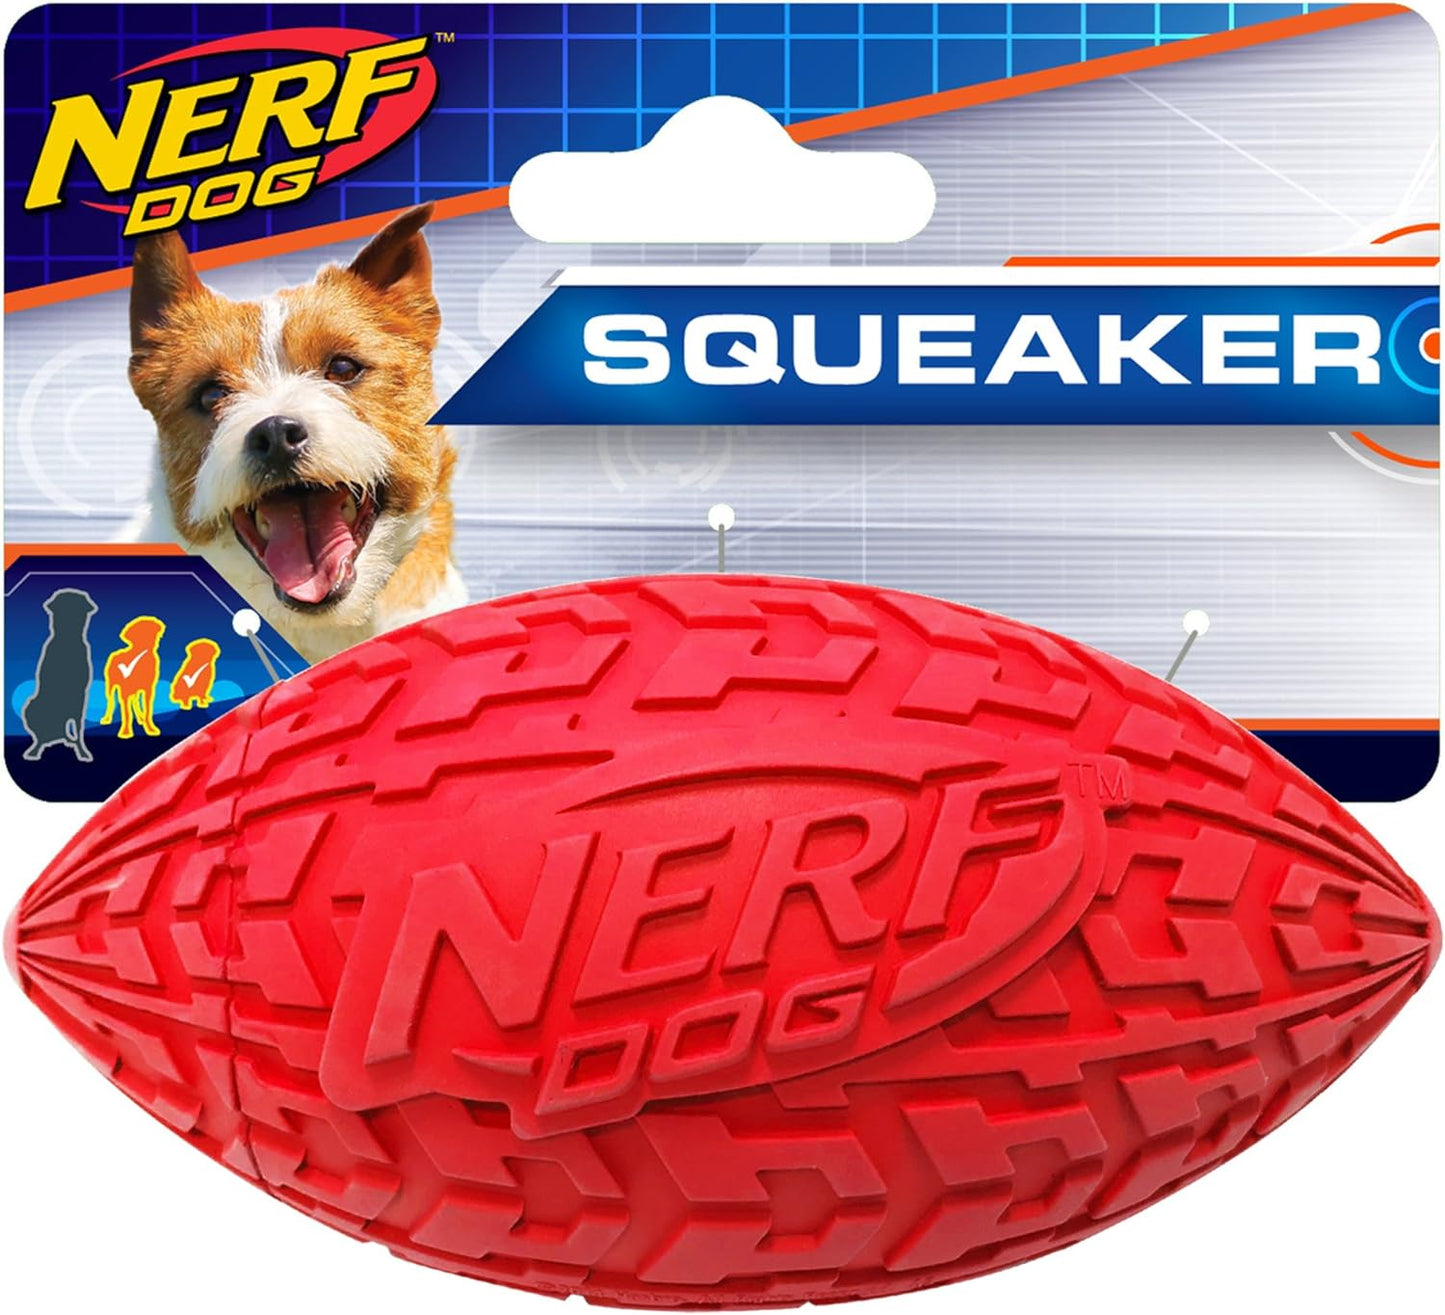 Dog Rubber Football Dog Toy with Interactive Squeaker, Lightweight, Durable and Water Resistant, 5 Inch Diameter for Medium/Large Breeds, Single Unit, Red